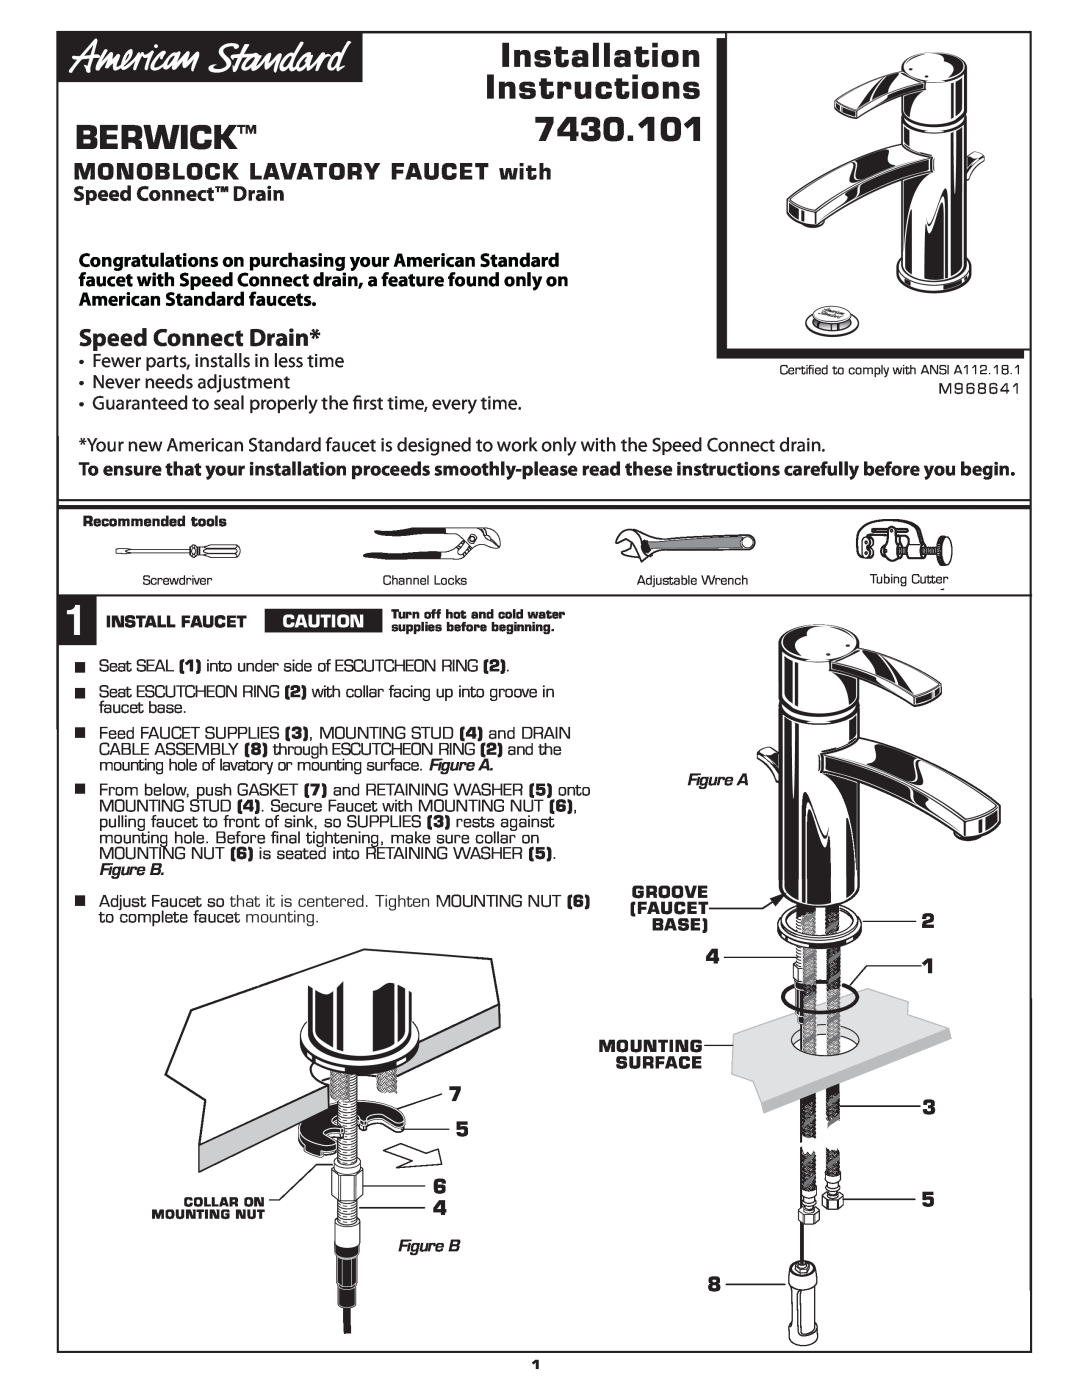 American Standard M968641 installation instructions Speed Connect Drain, Install Faucet, Figure A, Groove Faucet Base 